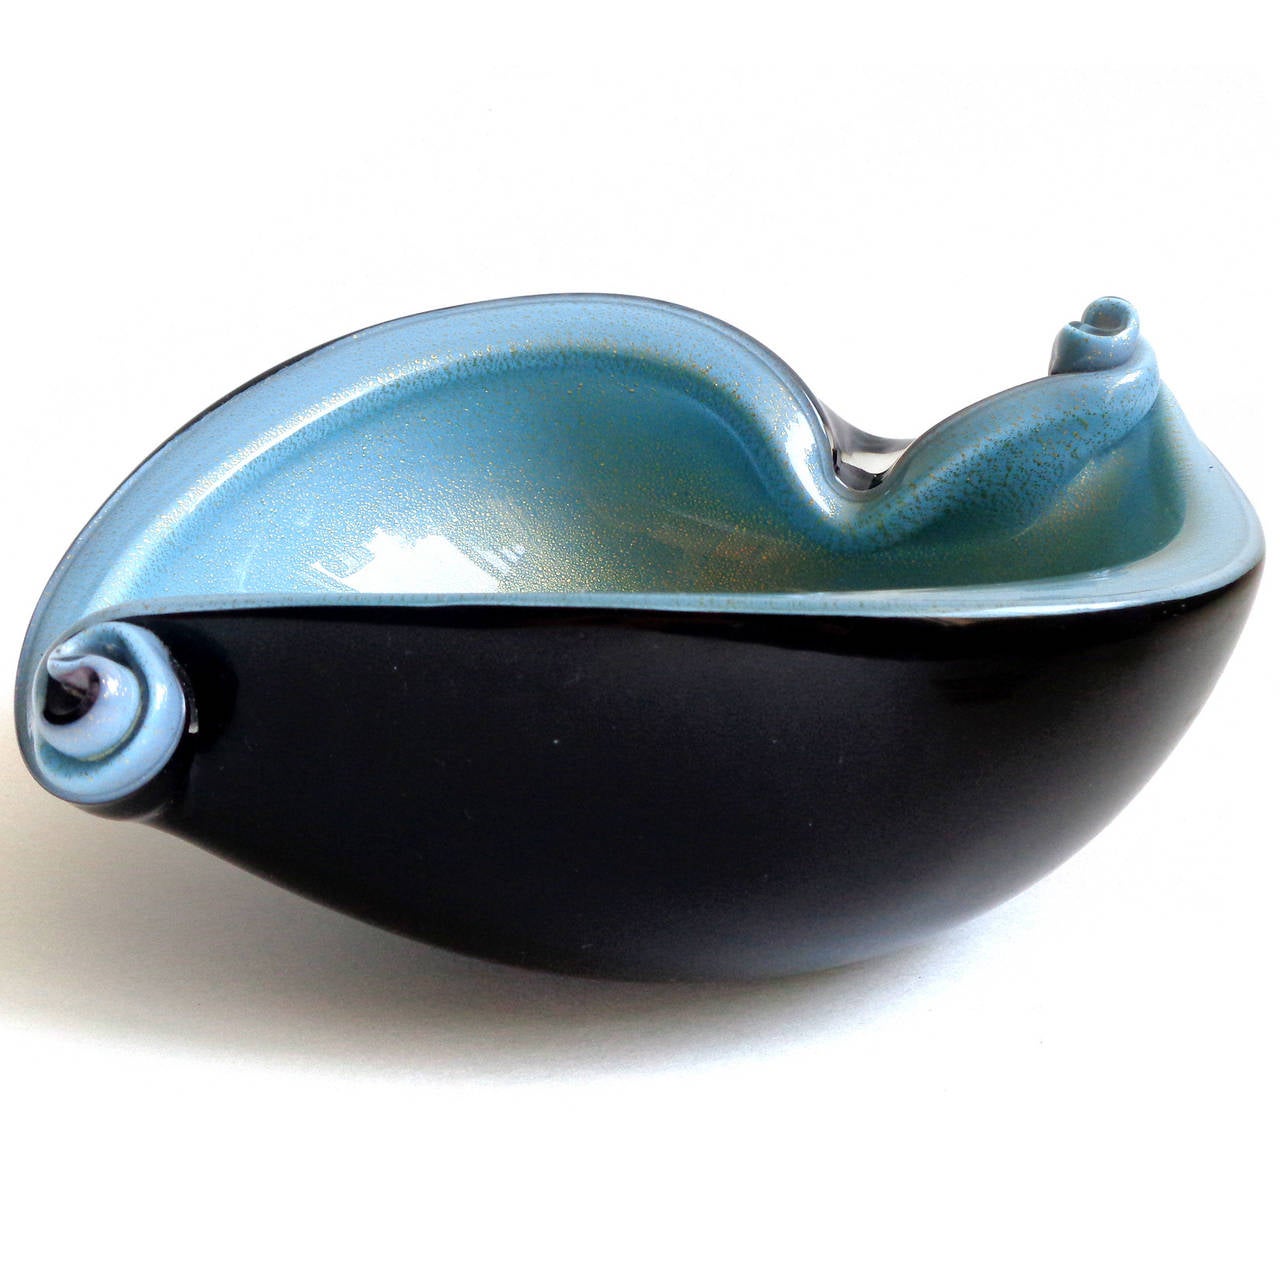 Beautiful Murano handblown black, blue and gold flecks Italian art glass bowl, with scroll decoration. Documented to designer Alfredo Barbini, circa 1950s and published in his catalog. Great color combination and shell shape. There are 2 similar